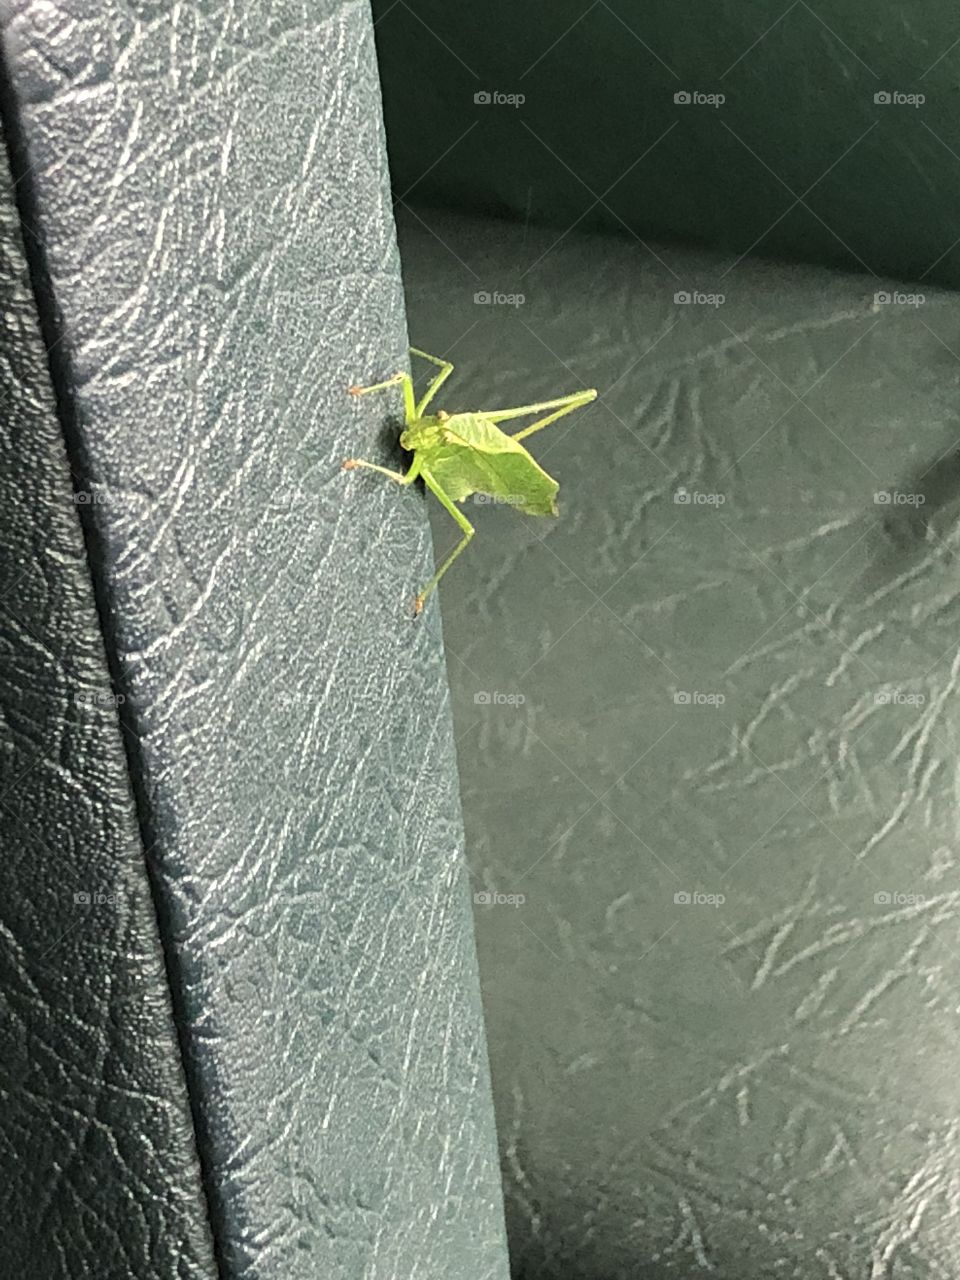 Insect on Seat